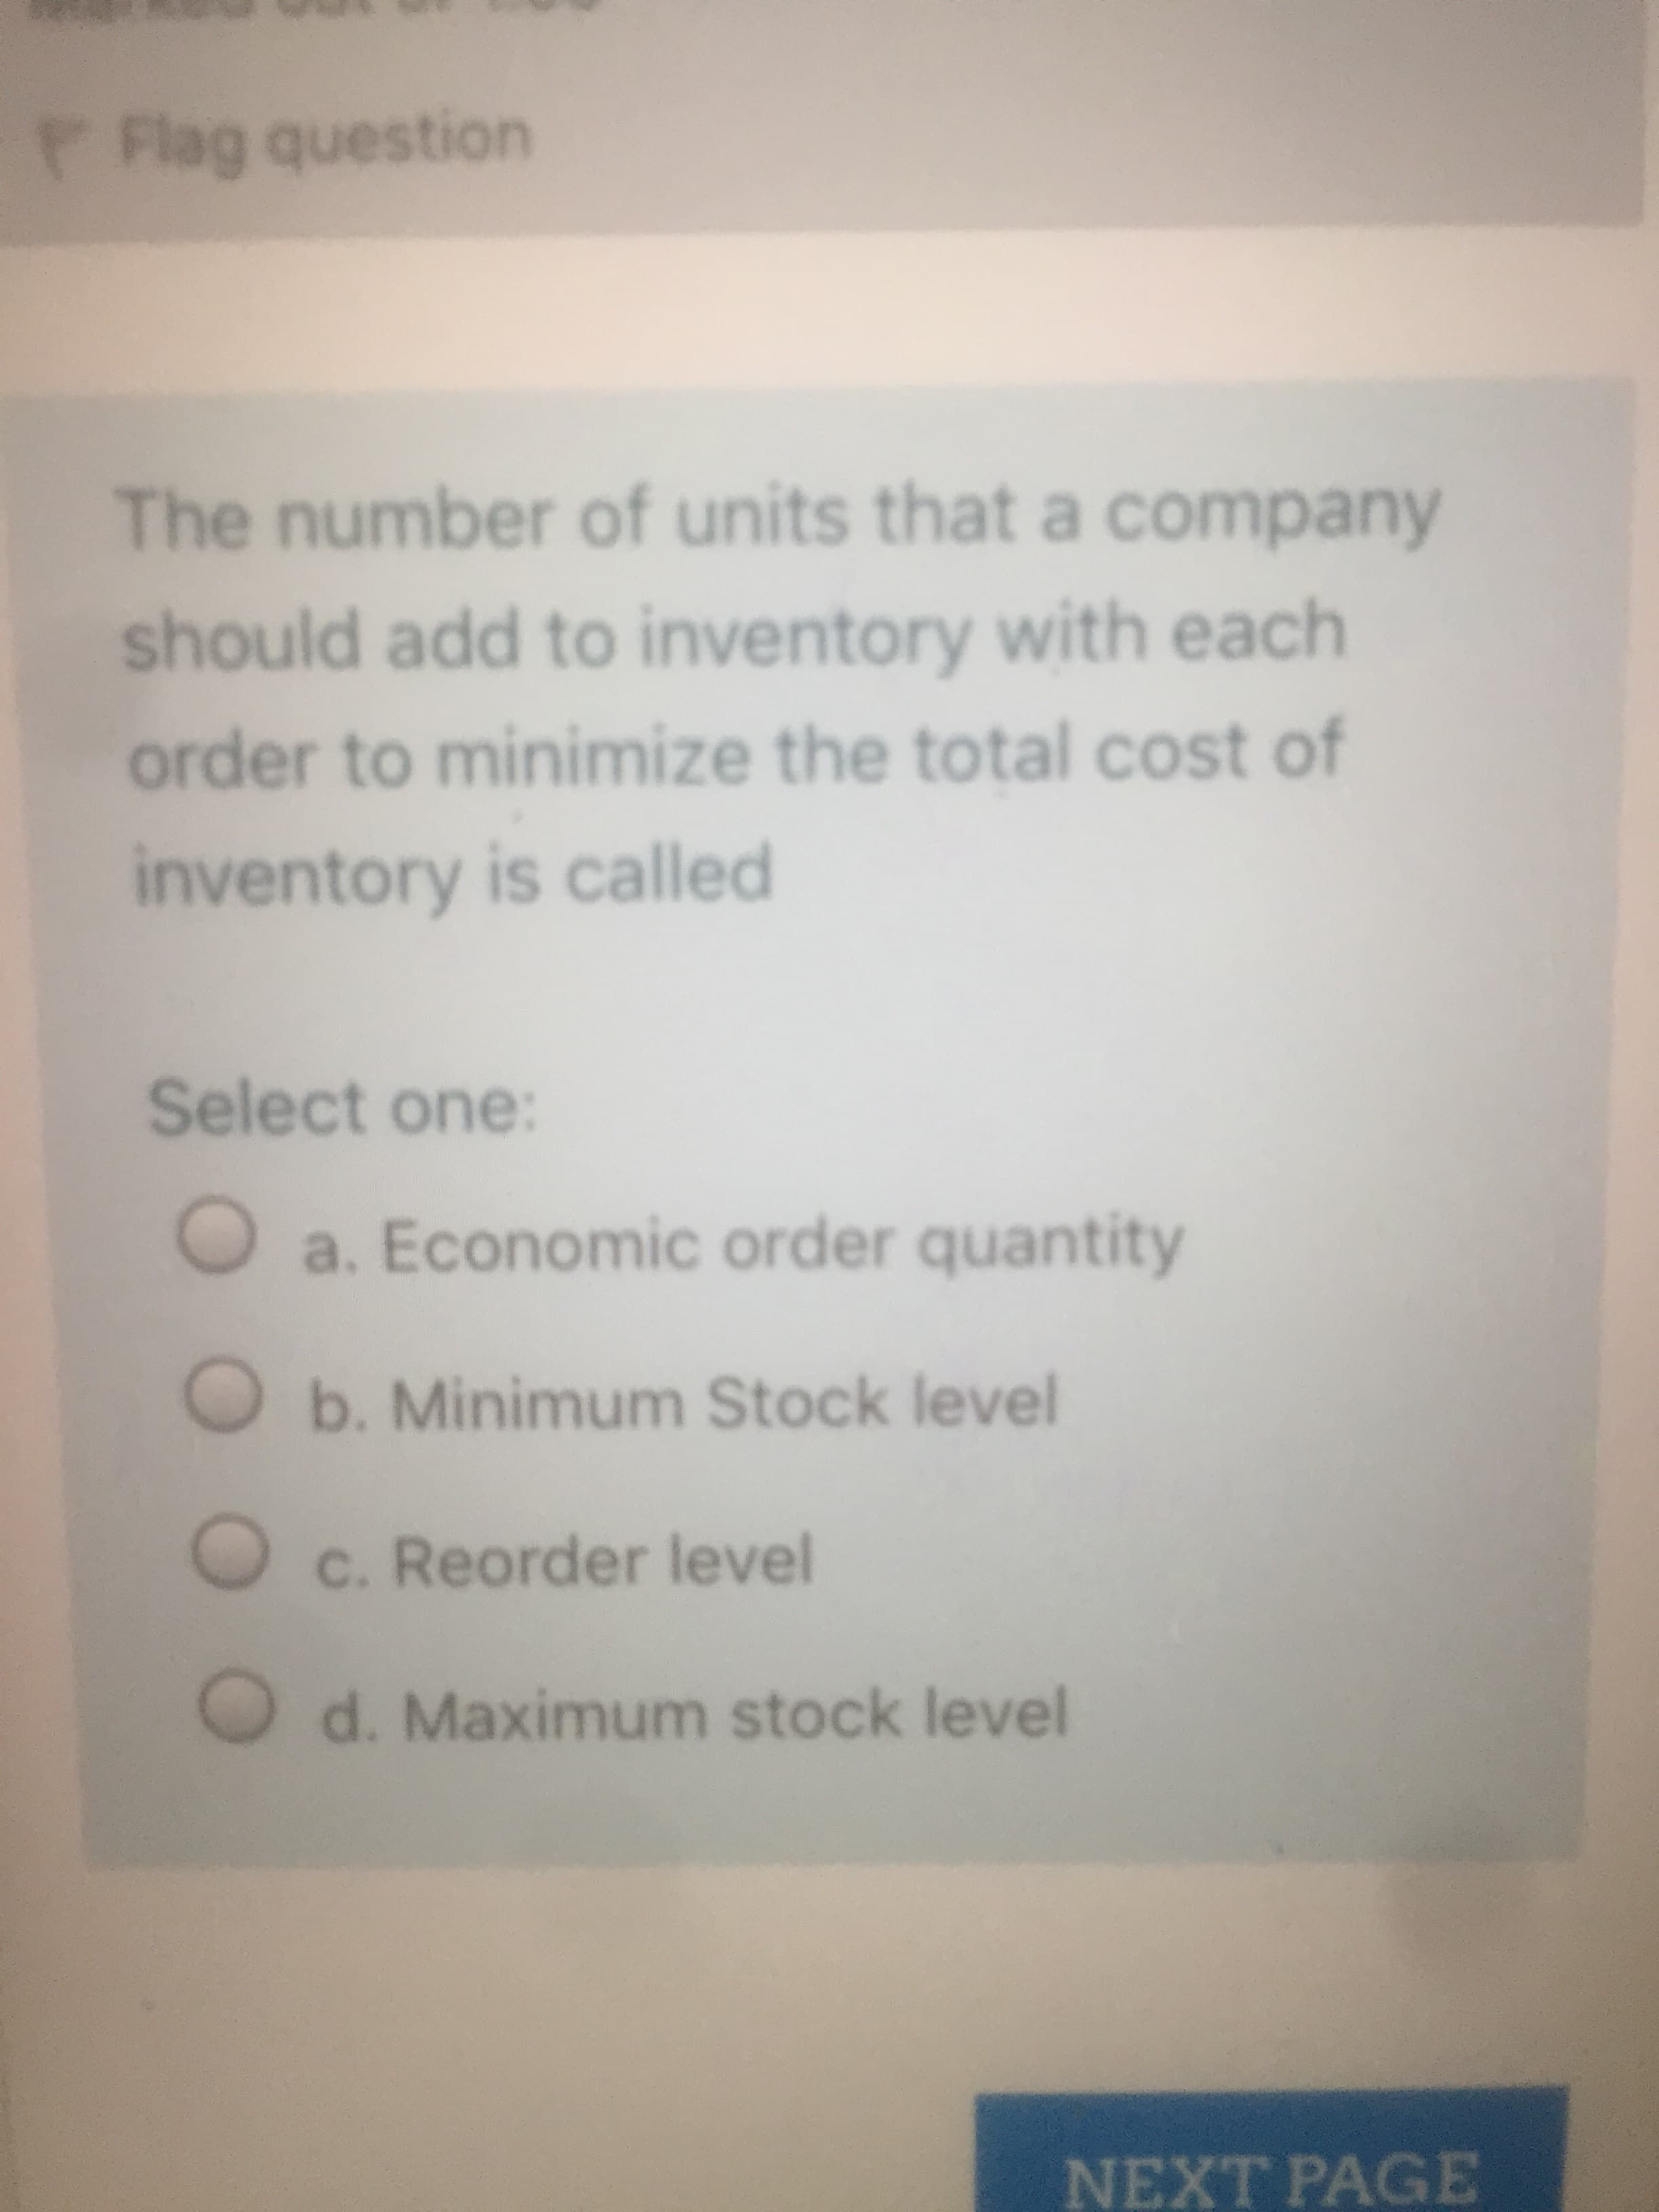 The number of units that a company
should add to inventory with each
order to minimize the total cost of
inventory is called
Select one:
a. Economic order quantity
O b. Minimum Stock level
c. Reorder level
d. Maximum stock level
